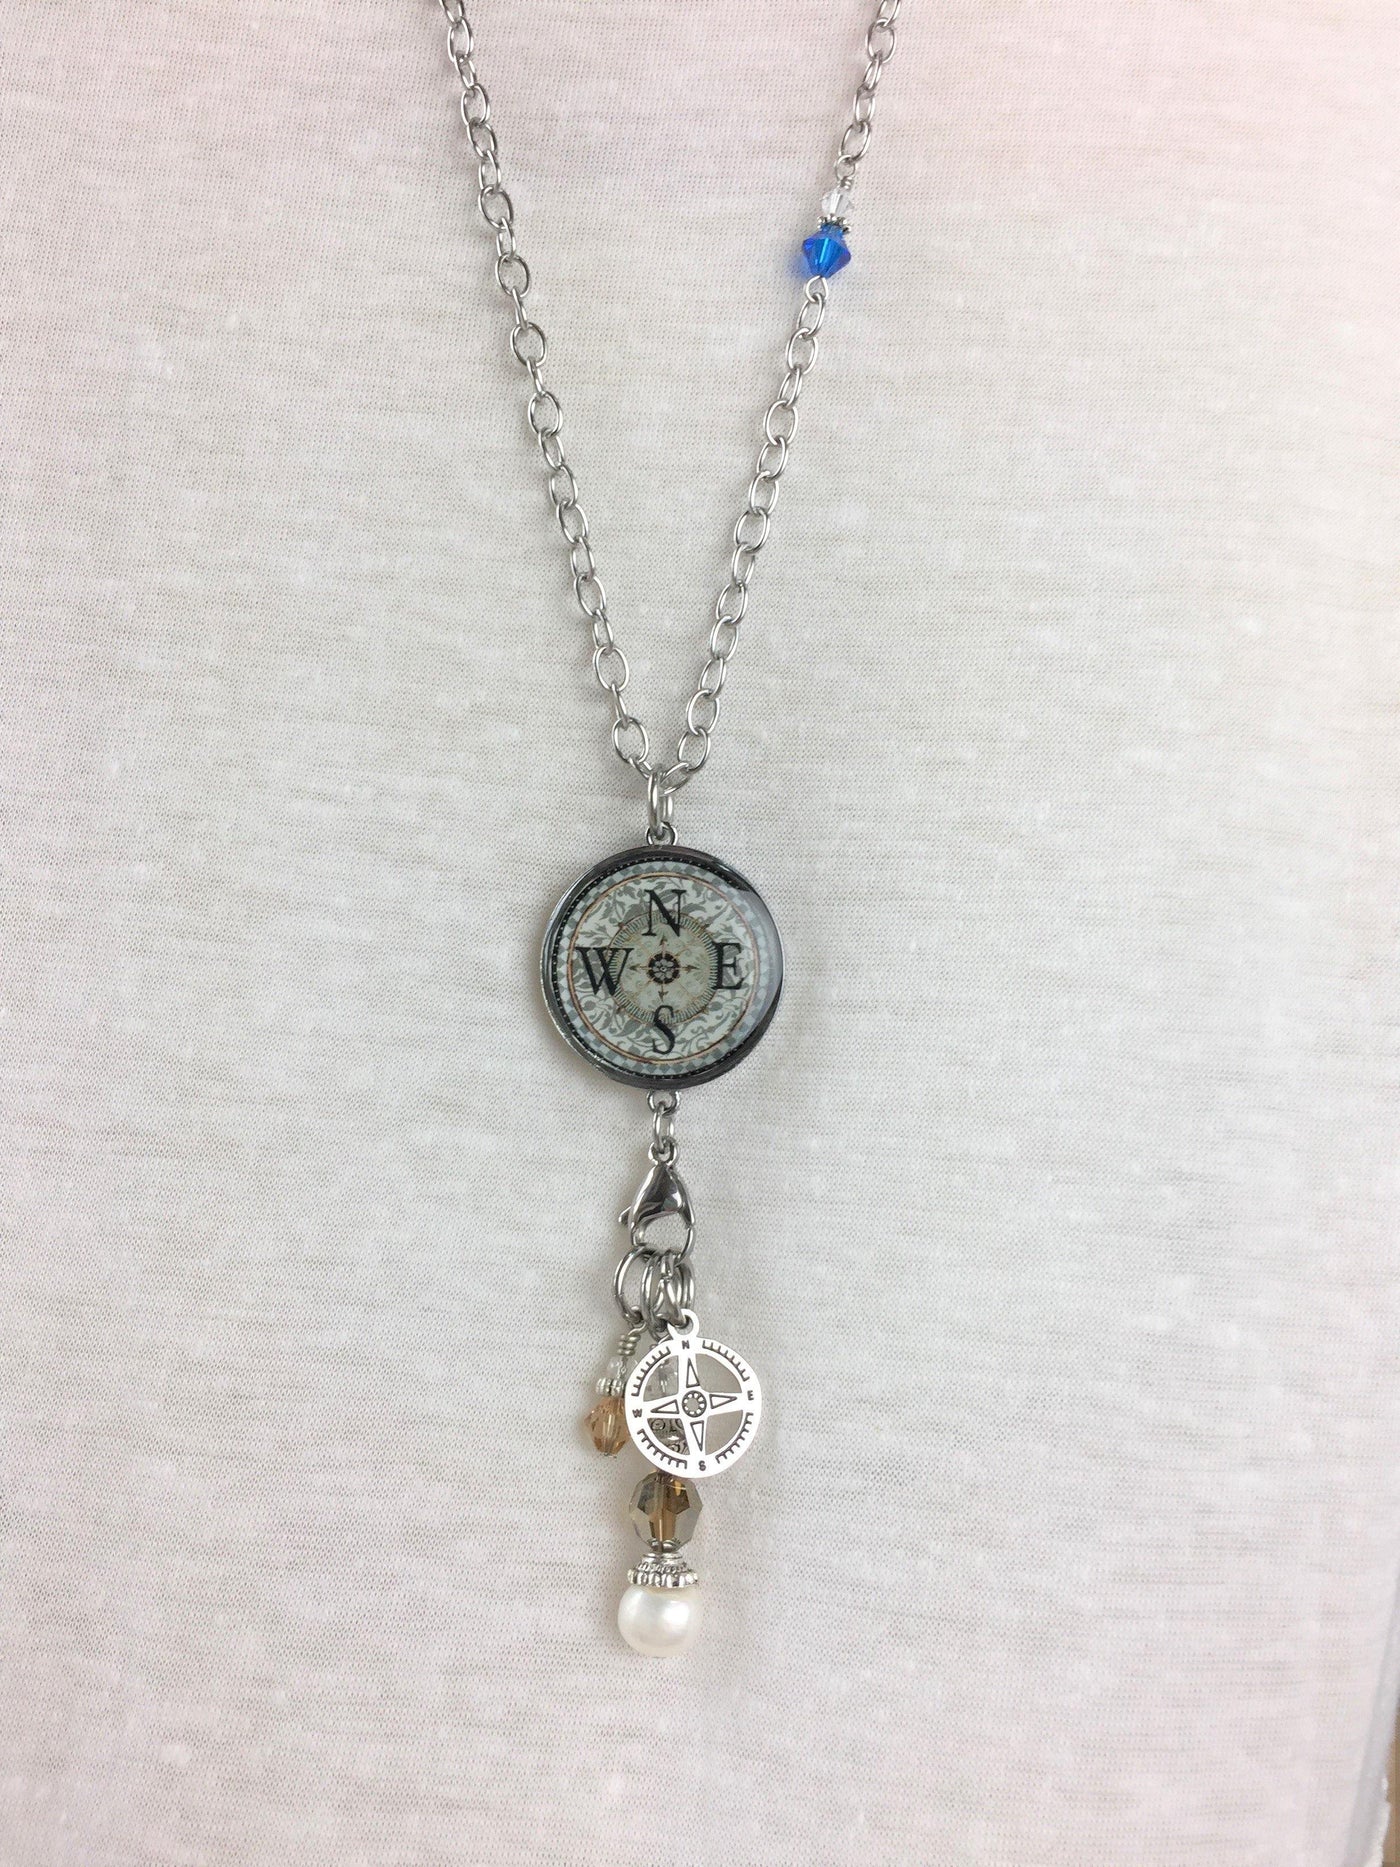 Brand: Spirit LaLa - Reversible Dangle Compass Inspirational Necklace -  BoHo, Compass, Gift Idea, Inspirational quote, Jewelry, jewelry made in USA, Made in America, made in usa, Made Local, Necklace, Pendant, Statement Necklace, Women - Classy Cozy Cool Boutique